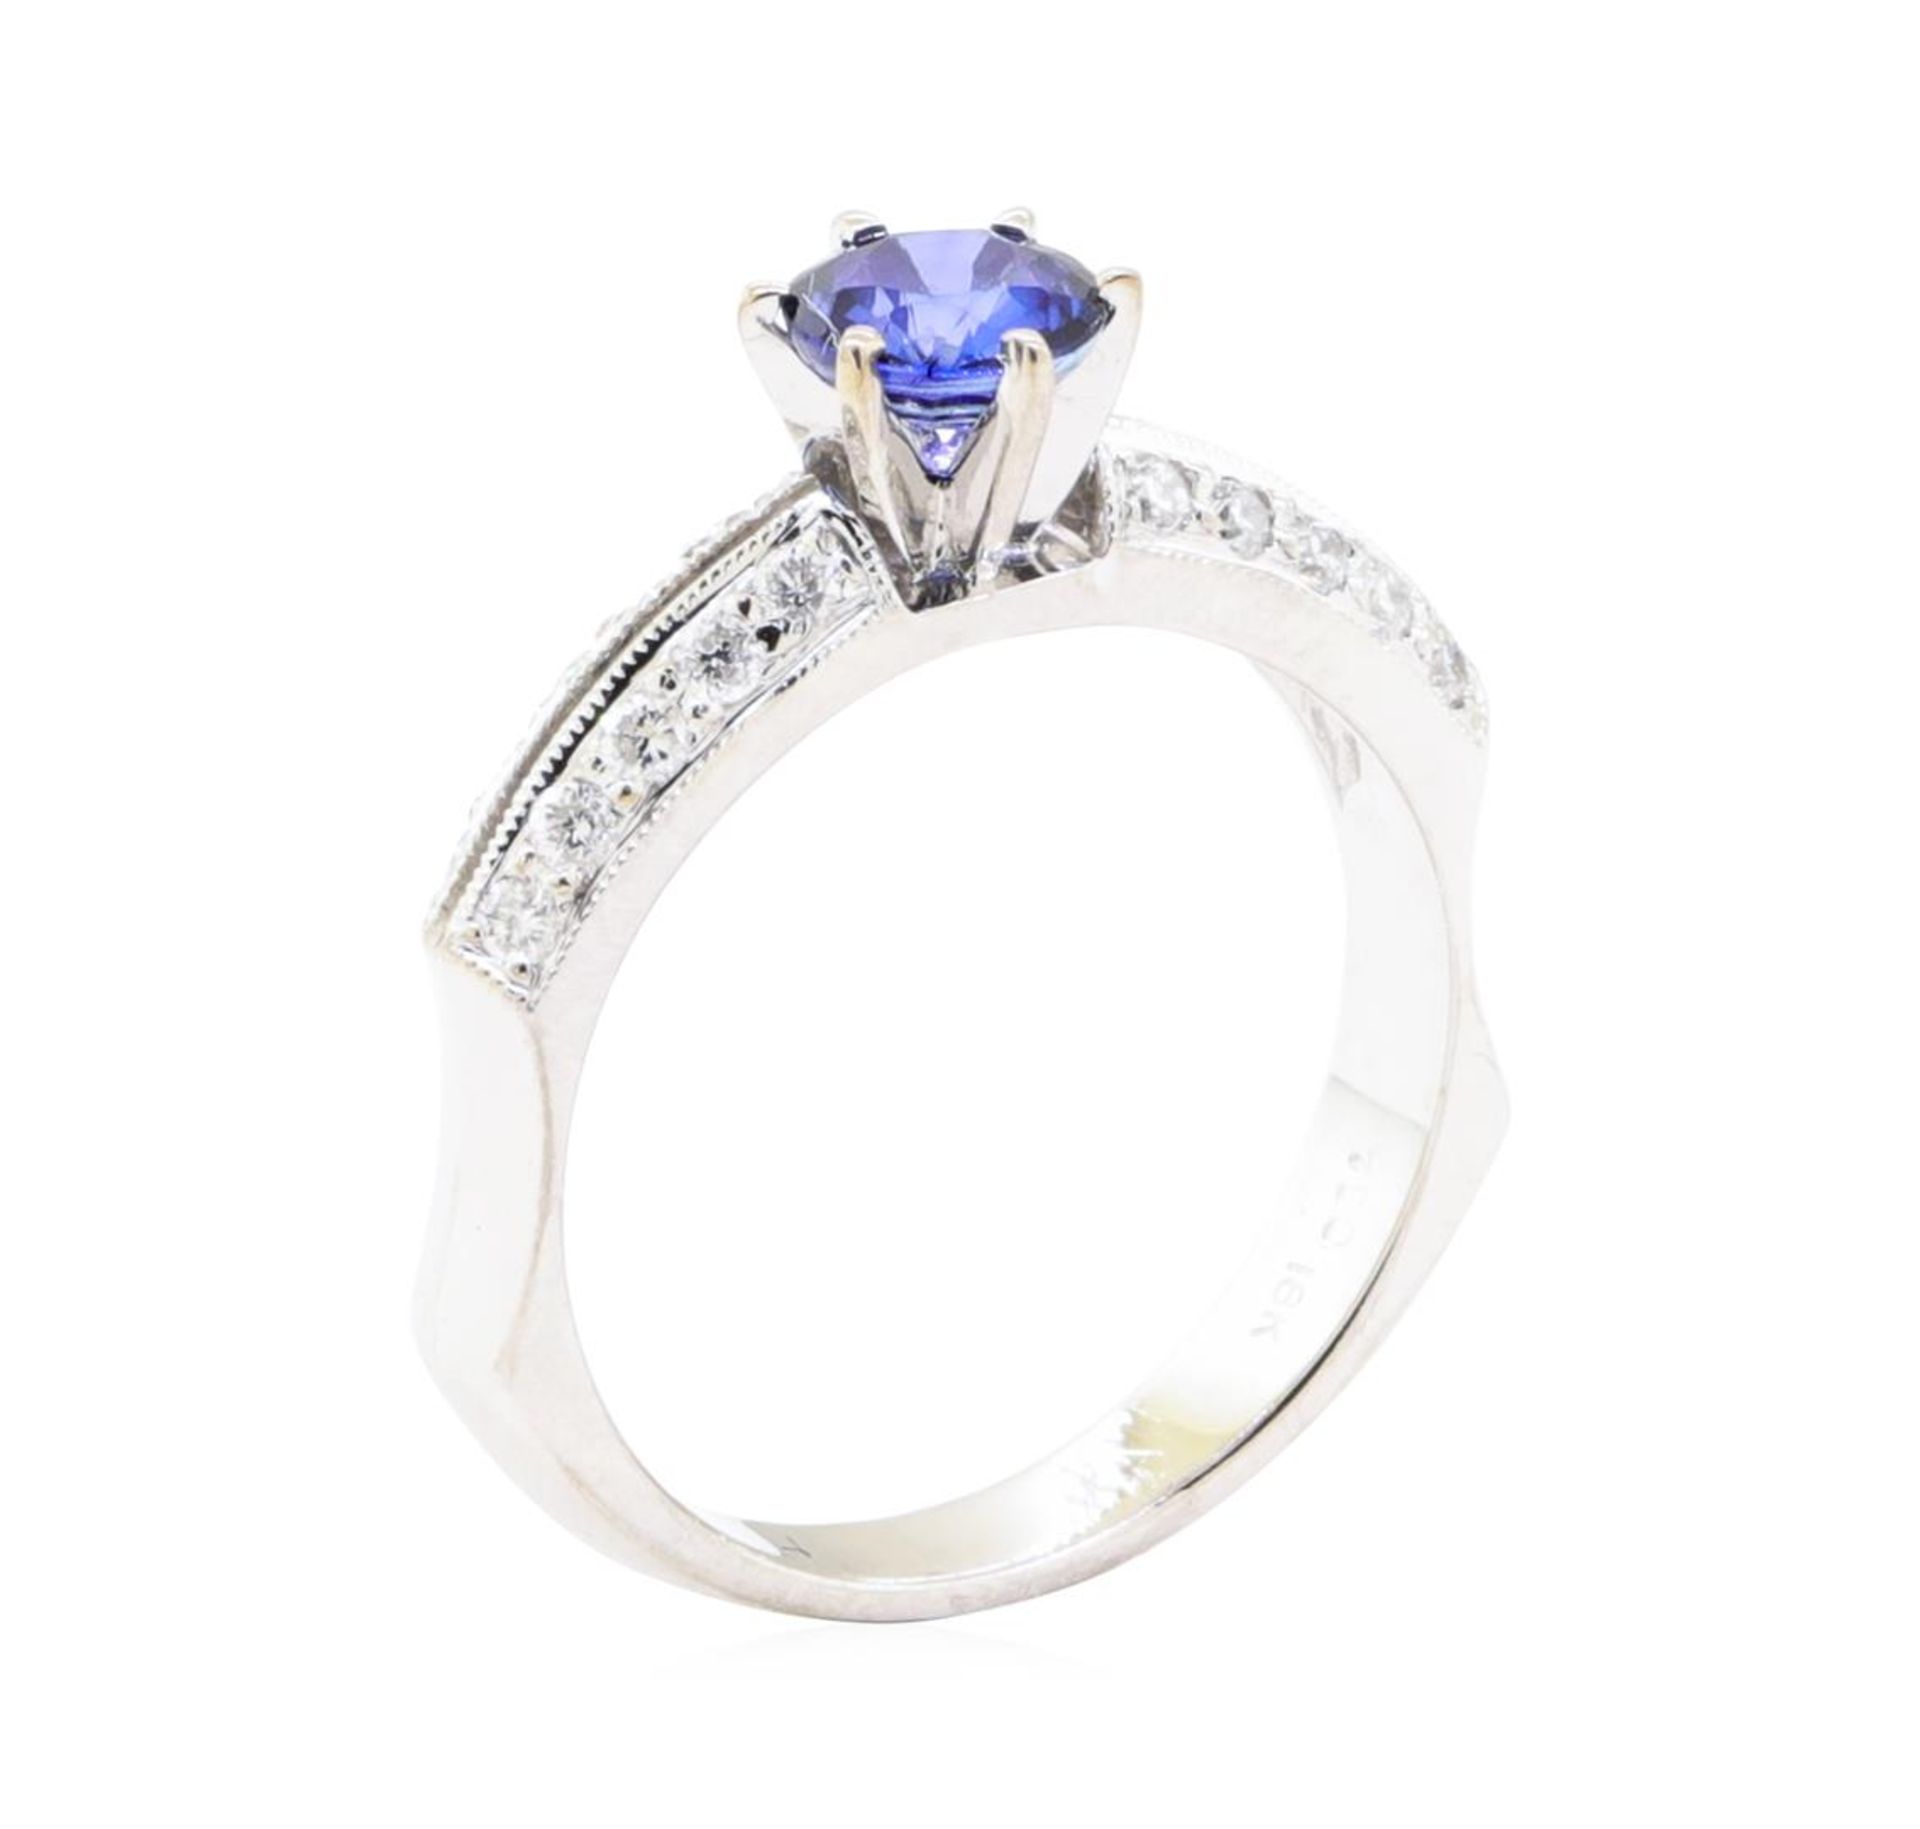 0.95 ctw Sapphire And Diamond Ring - 18KT White Gold - Image 7 of 10